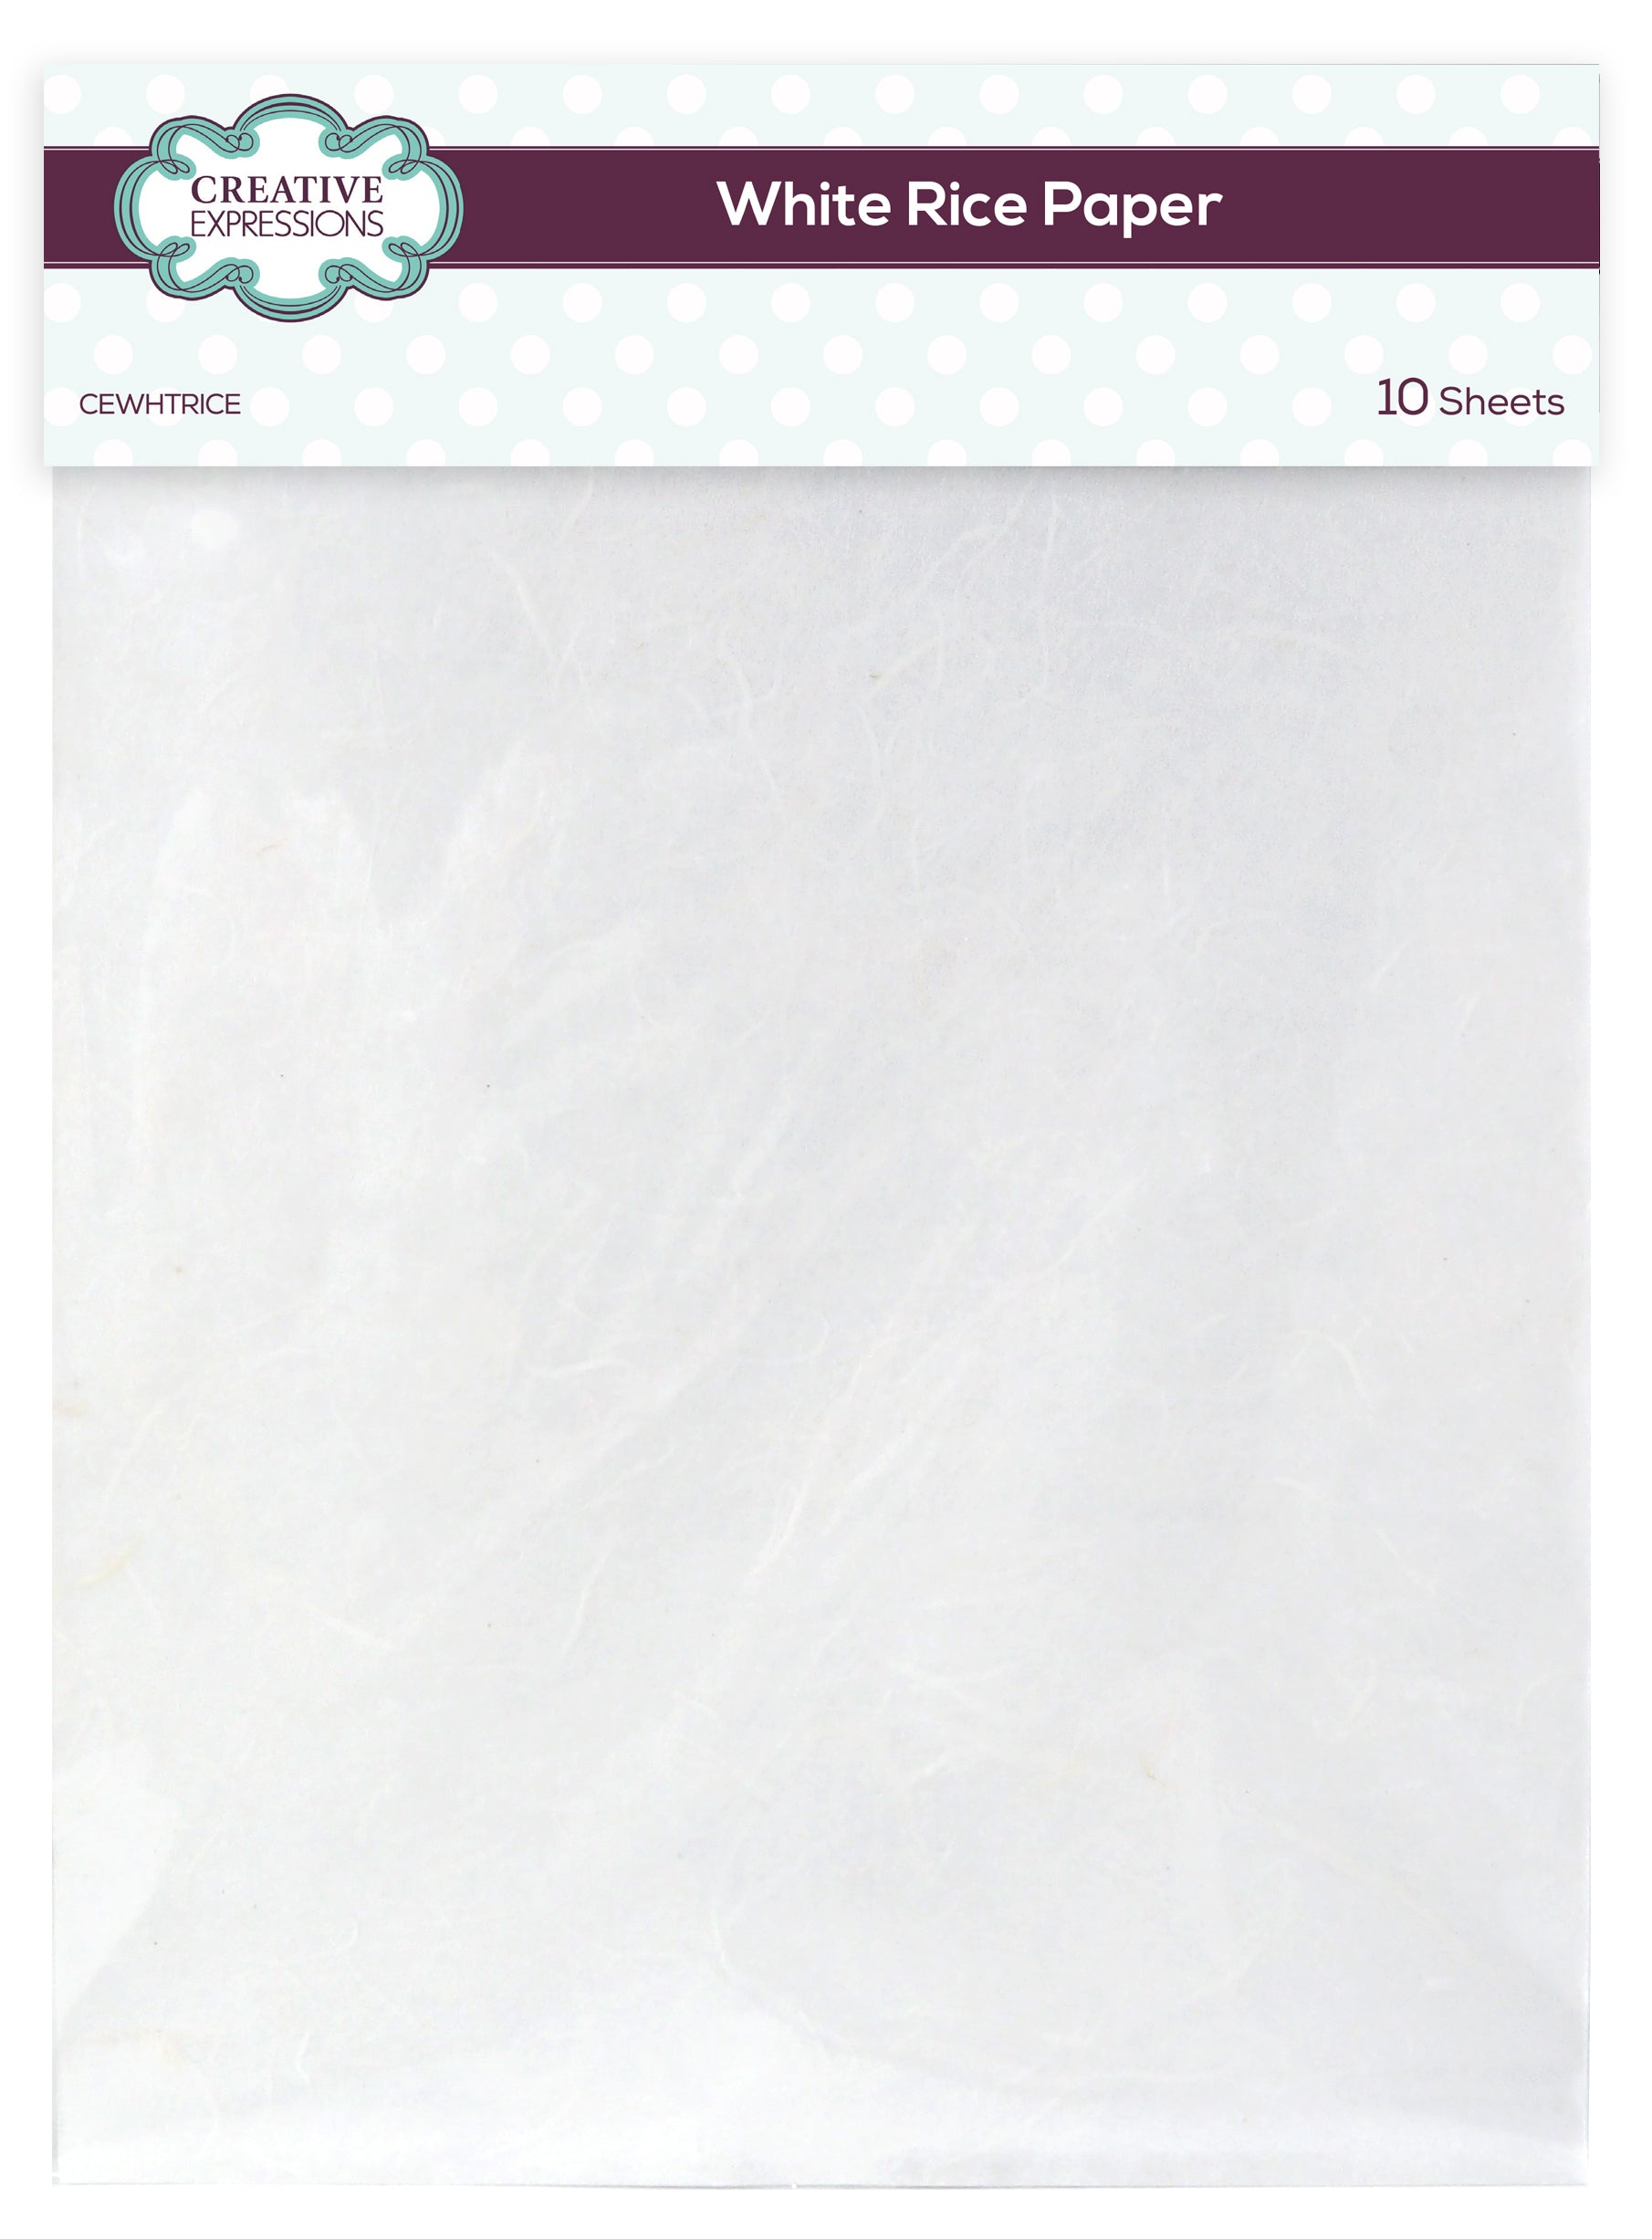 Creative Expressions 8 in x 12 in White Rice Paper pk 10